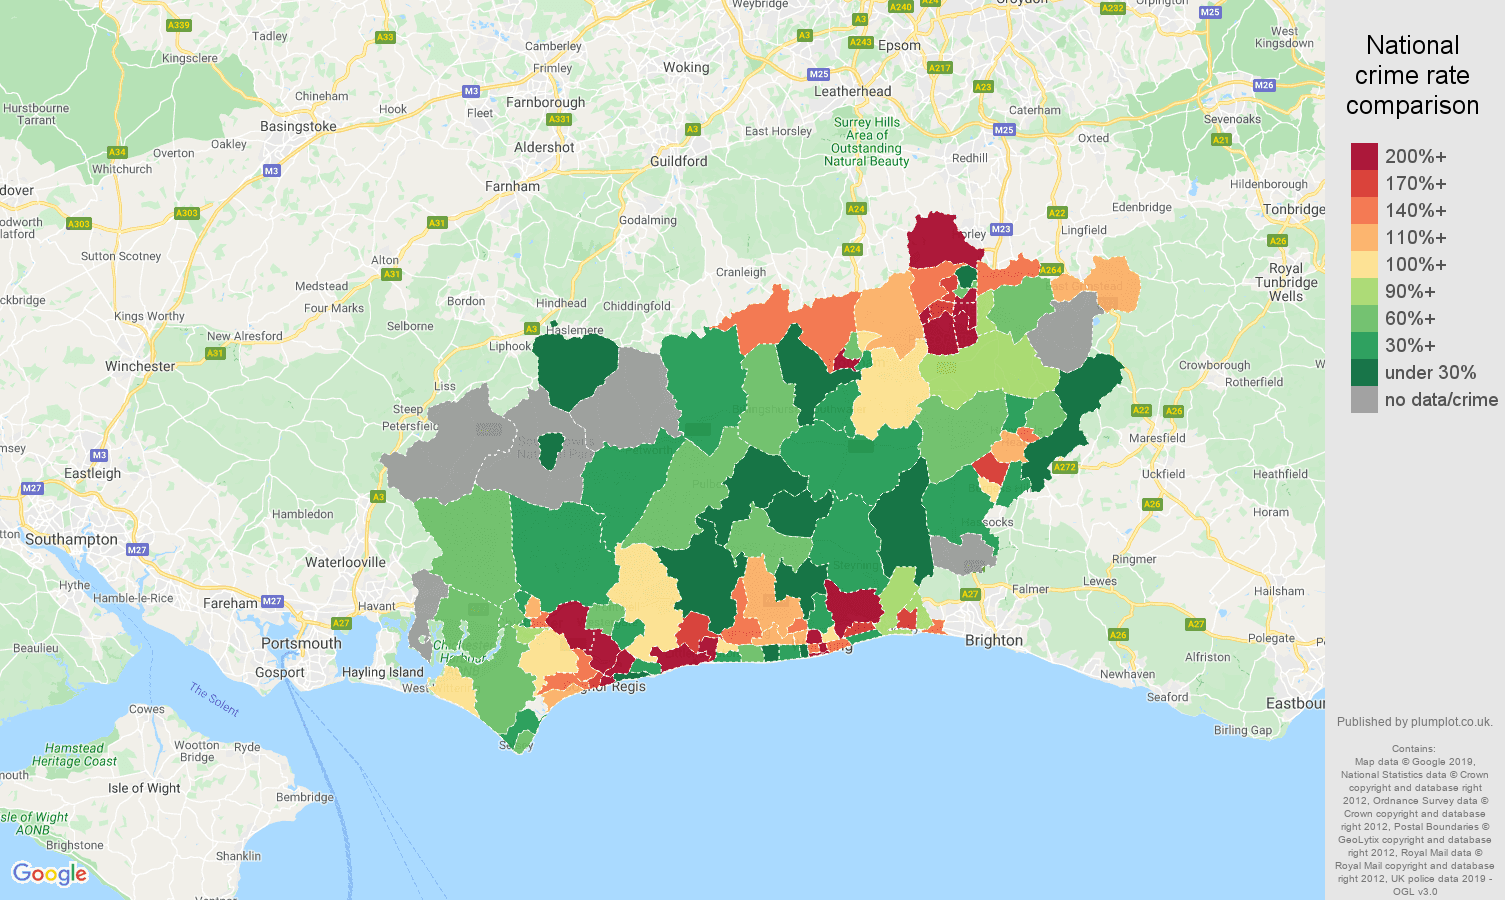 West Sussex possession of weapons crime rate comparison map